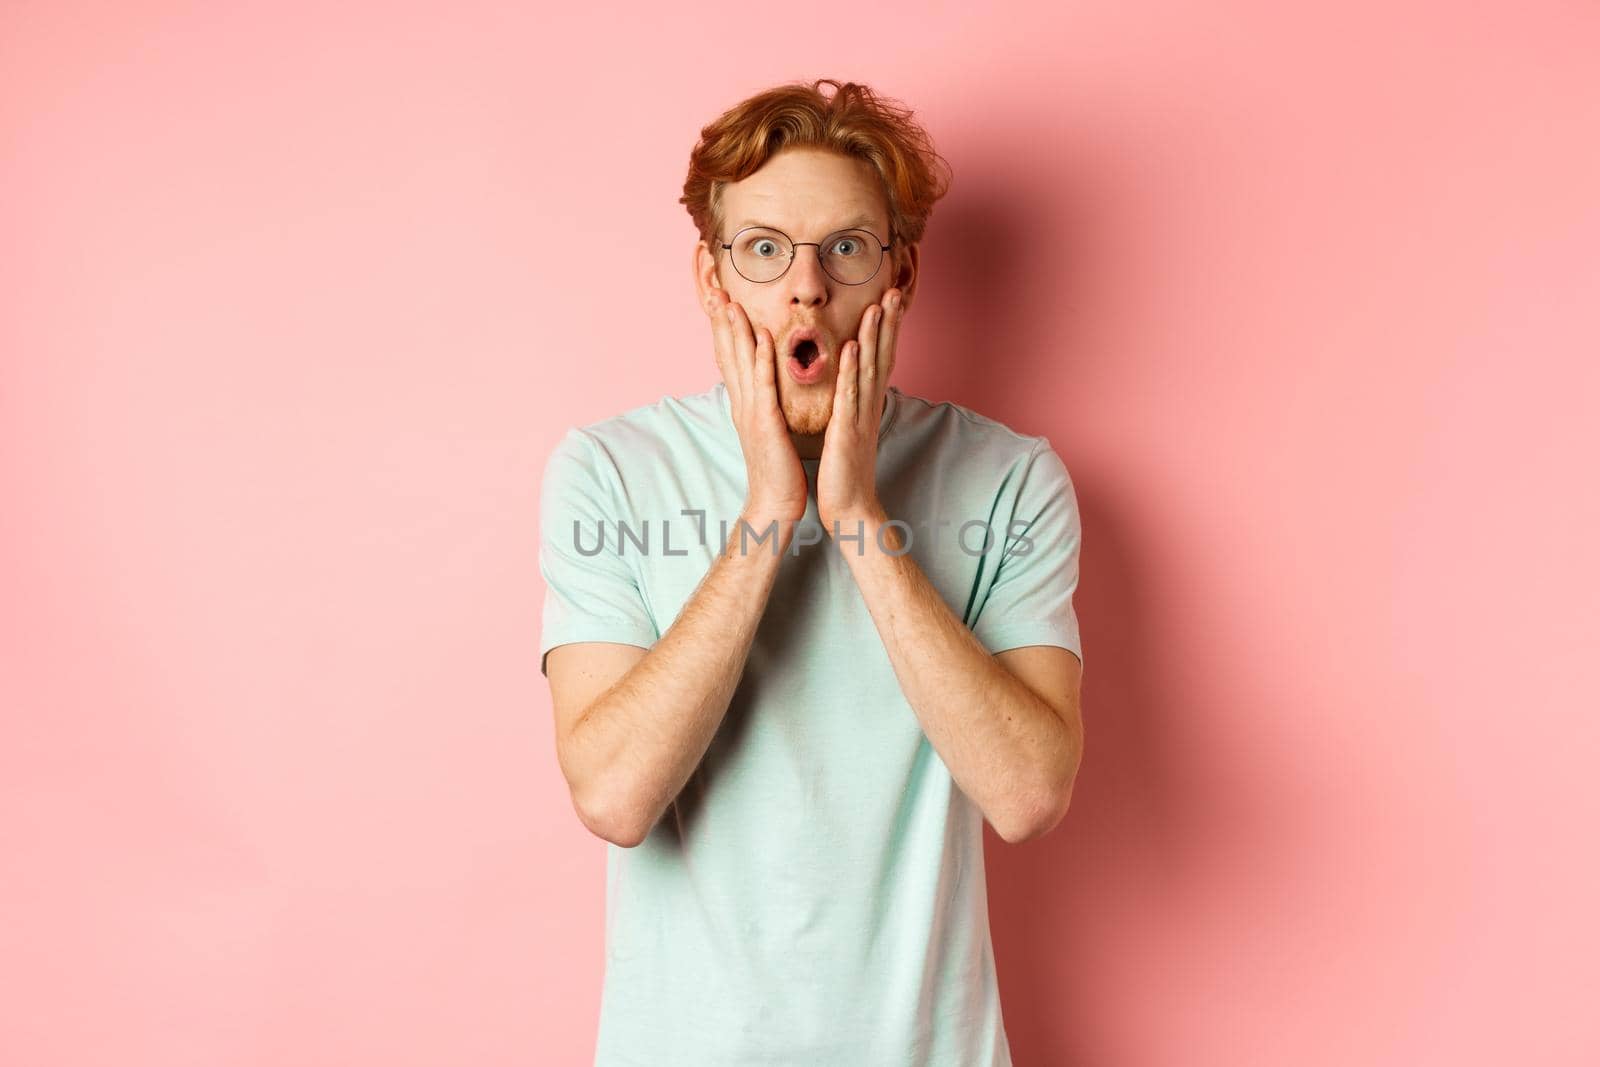 Shocked redhead man gossiping, staring impressed at camera and touching face, standing in glasses against pink background.